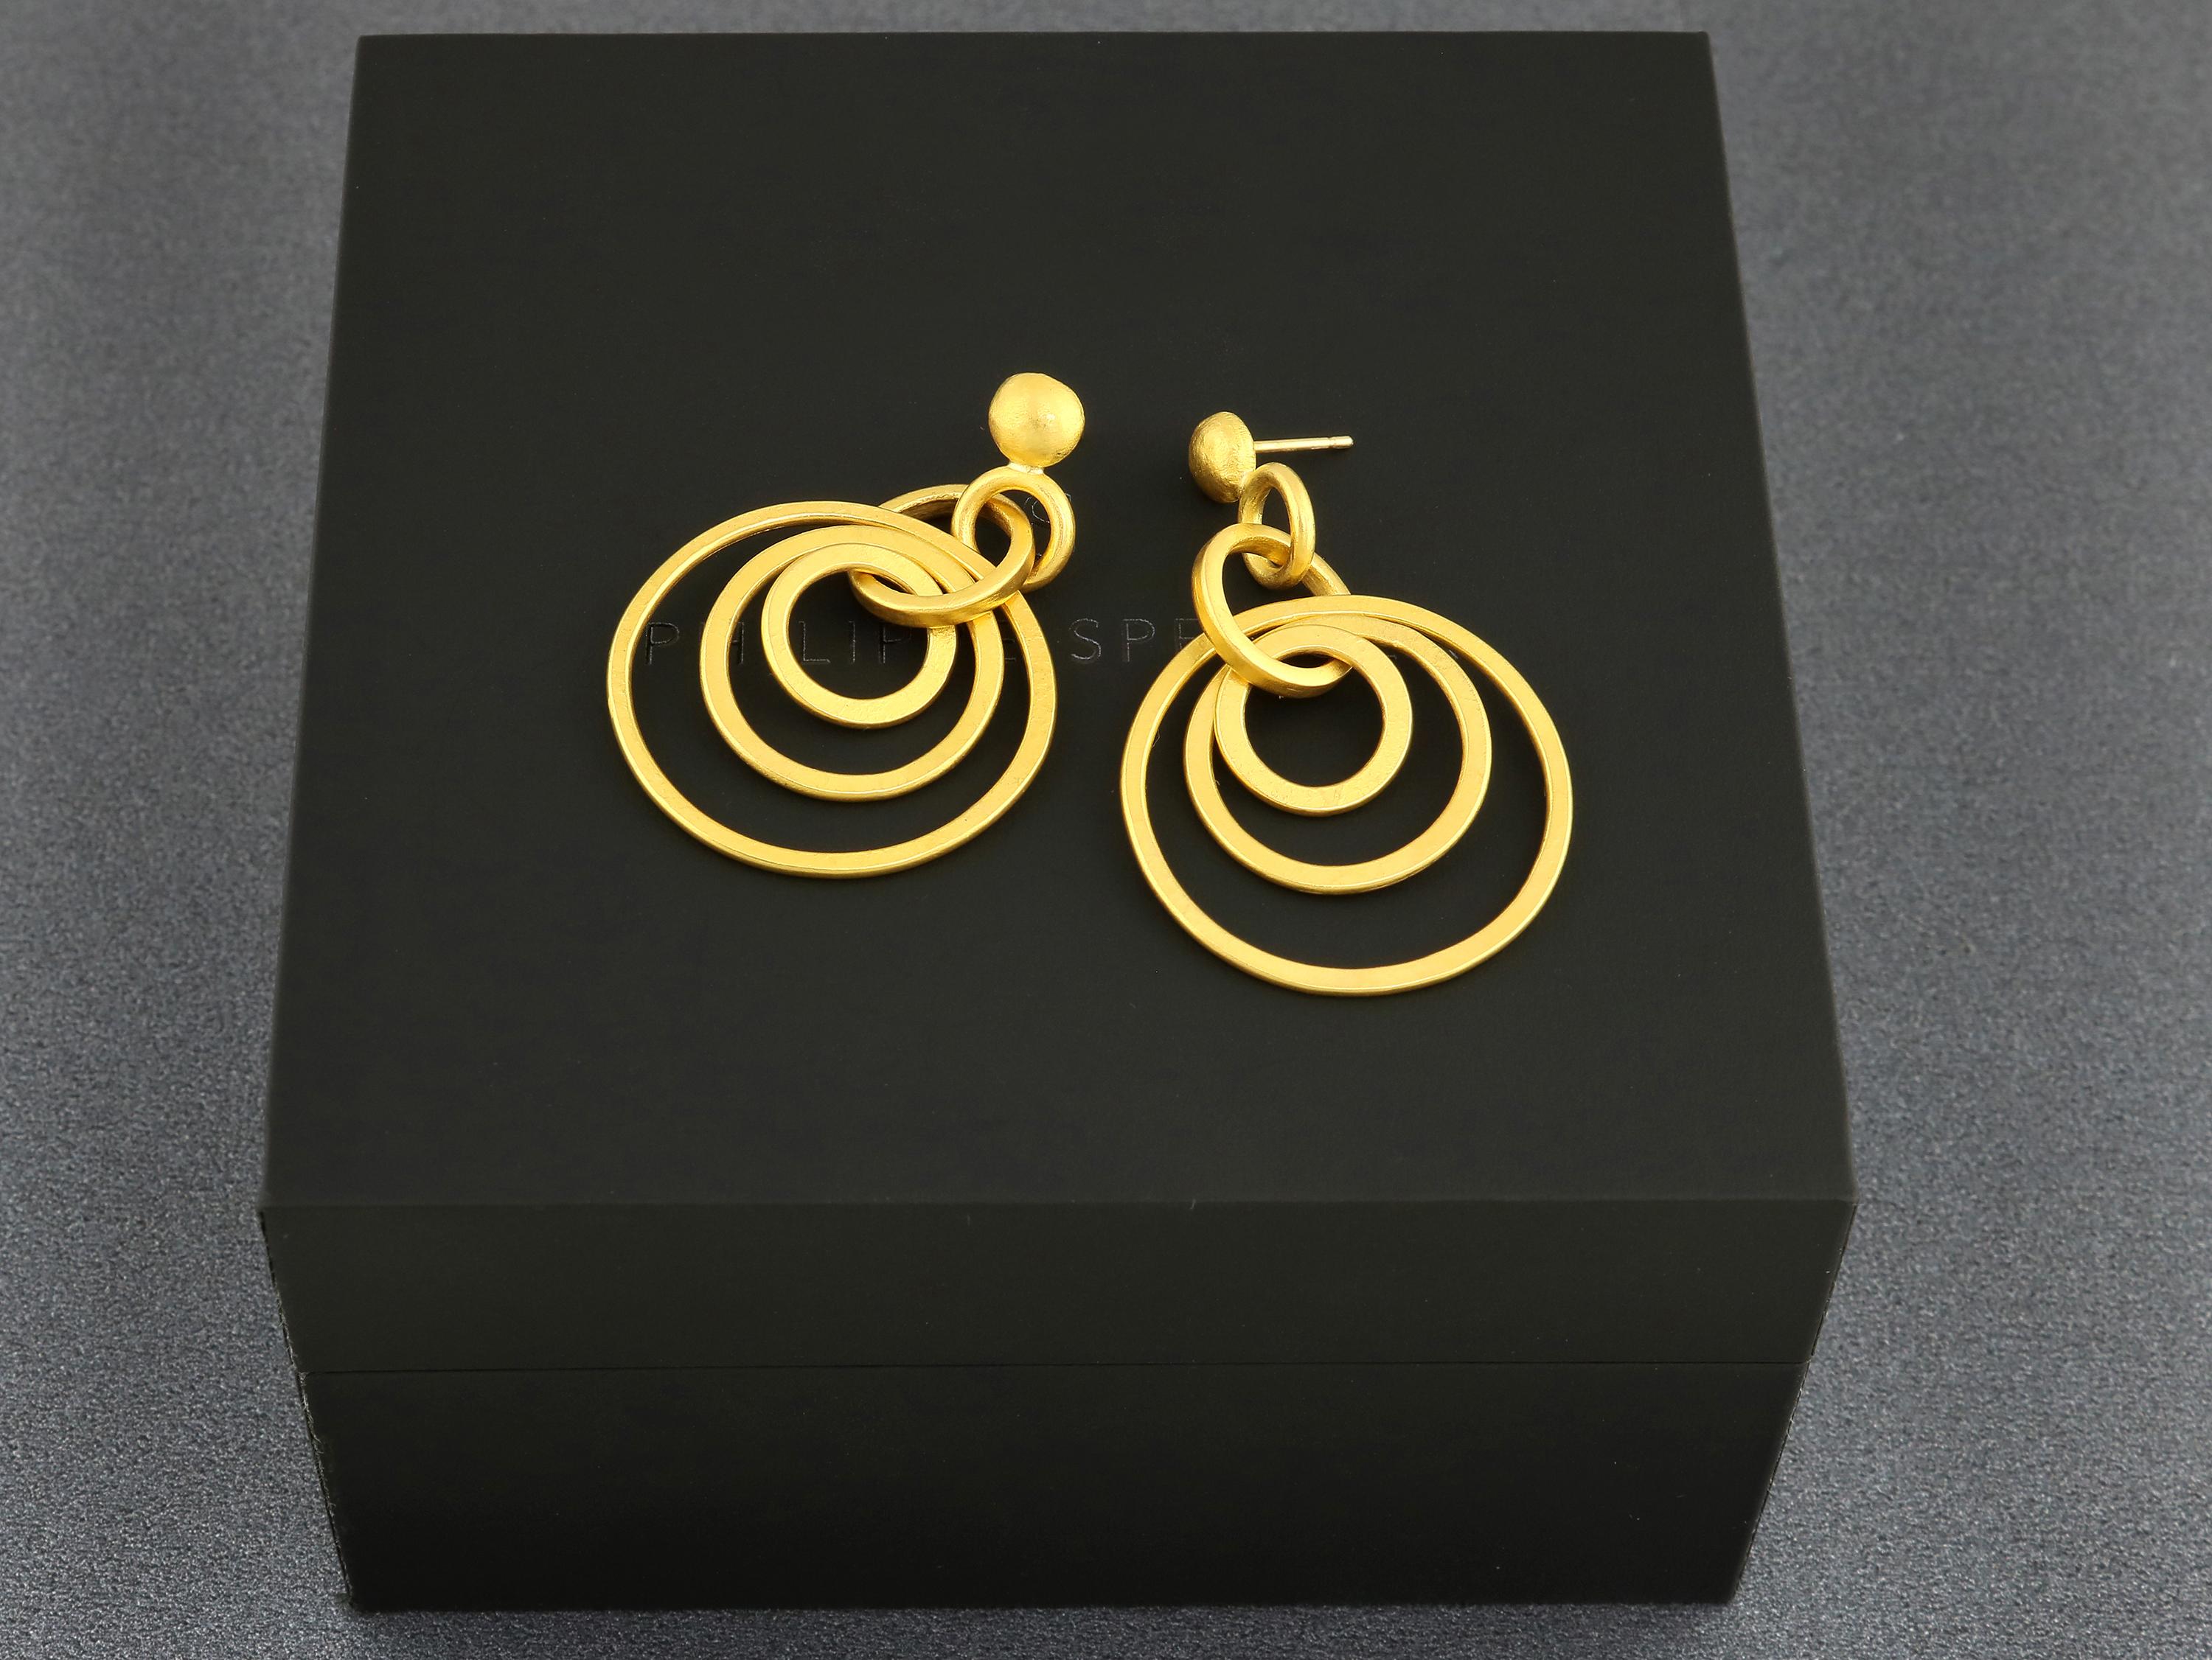 PHILIPPE SPENCER -  Solid 22K Gold Graduating Hoop Dangling Earrings. (18K Gold Post & Friction Back for durability). Each pair is a unique, authentically smithed One-Of-A-Kind work of art. 

These glorious completely Hand-Forged Graduating Hoop